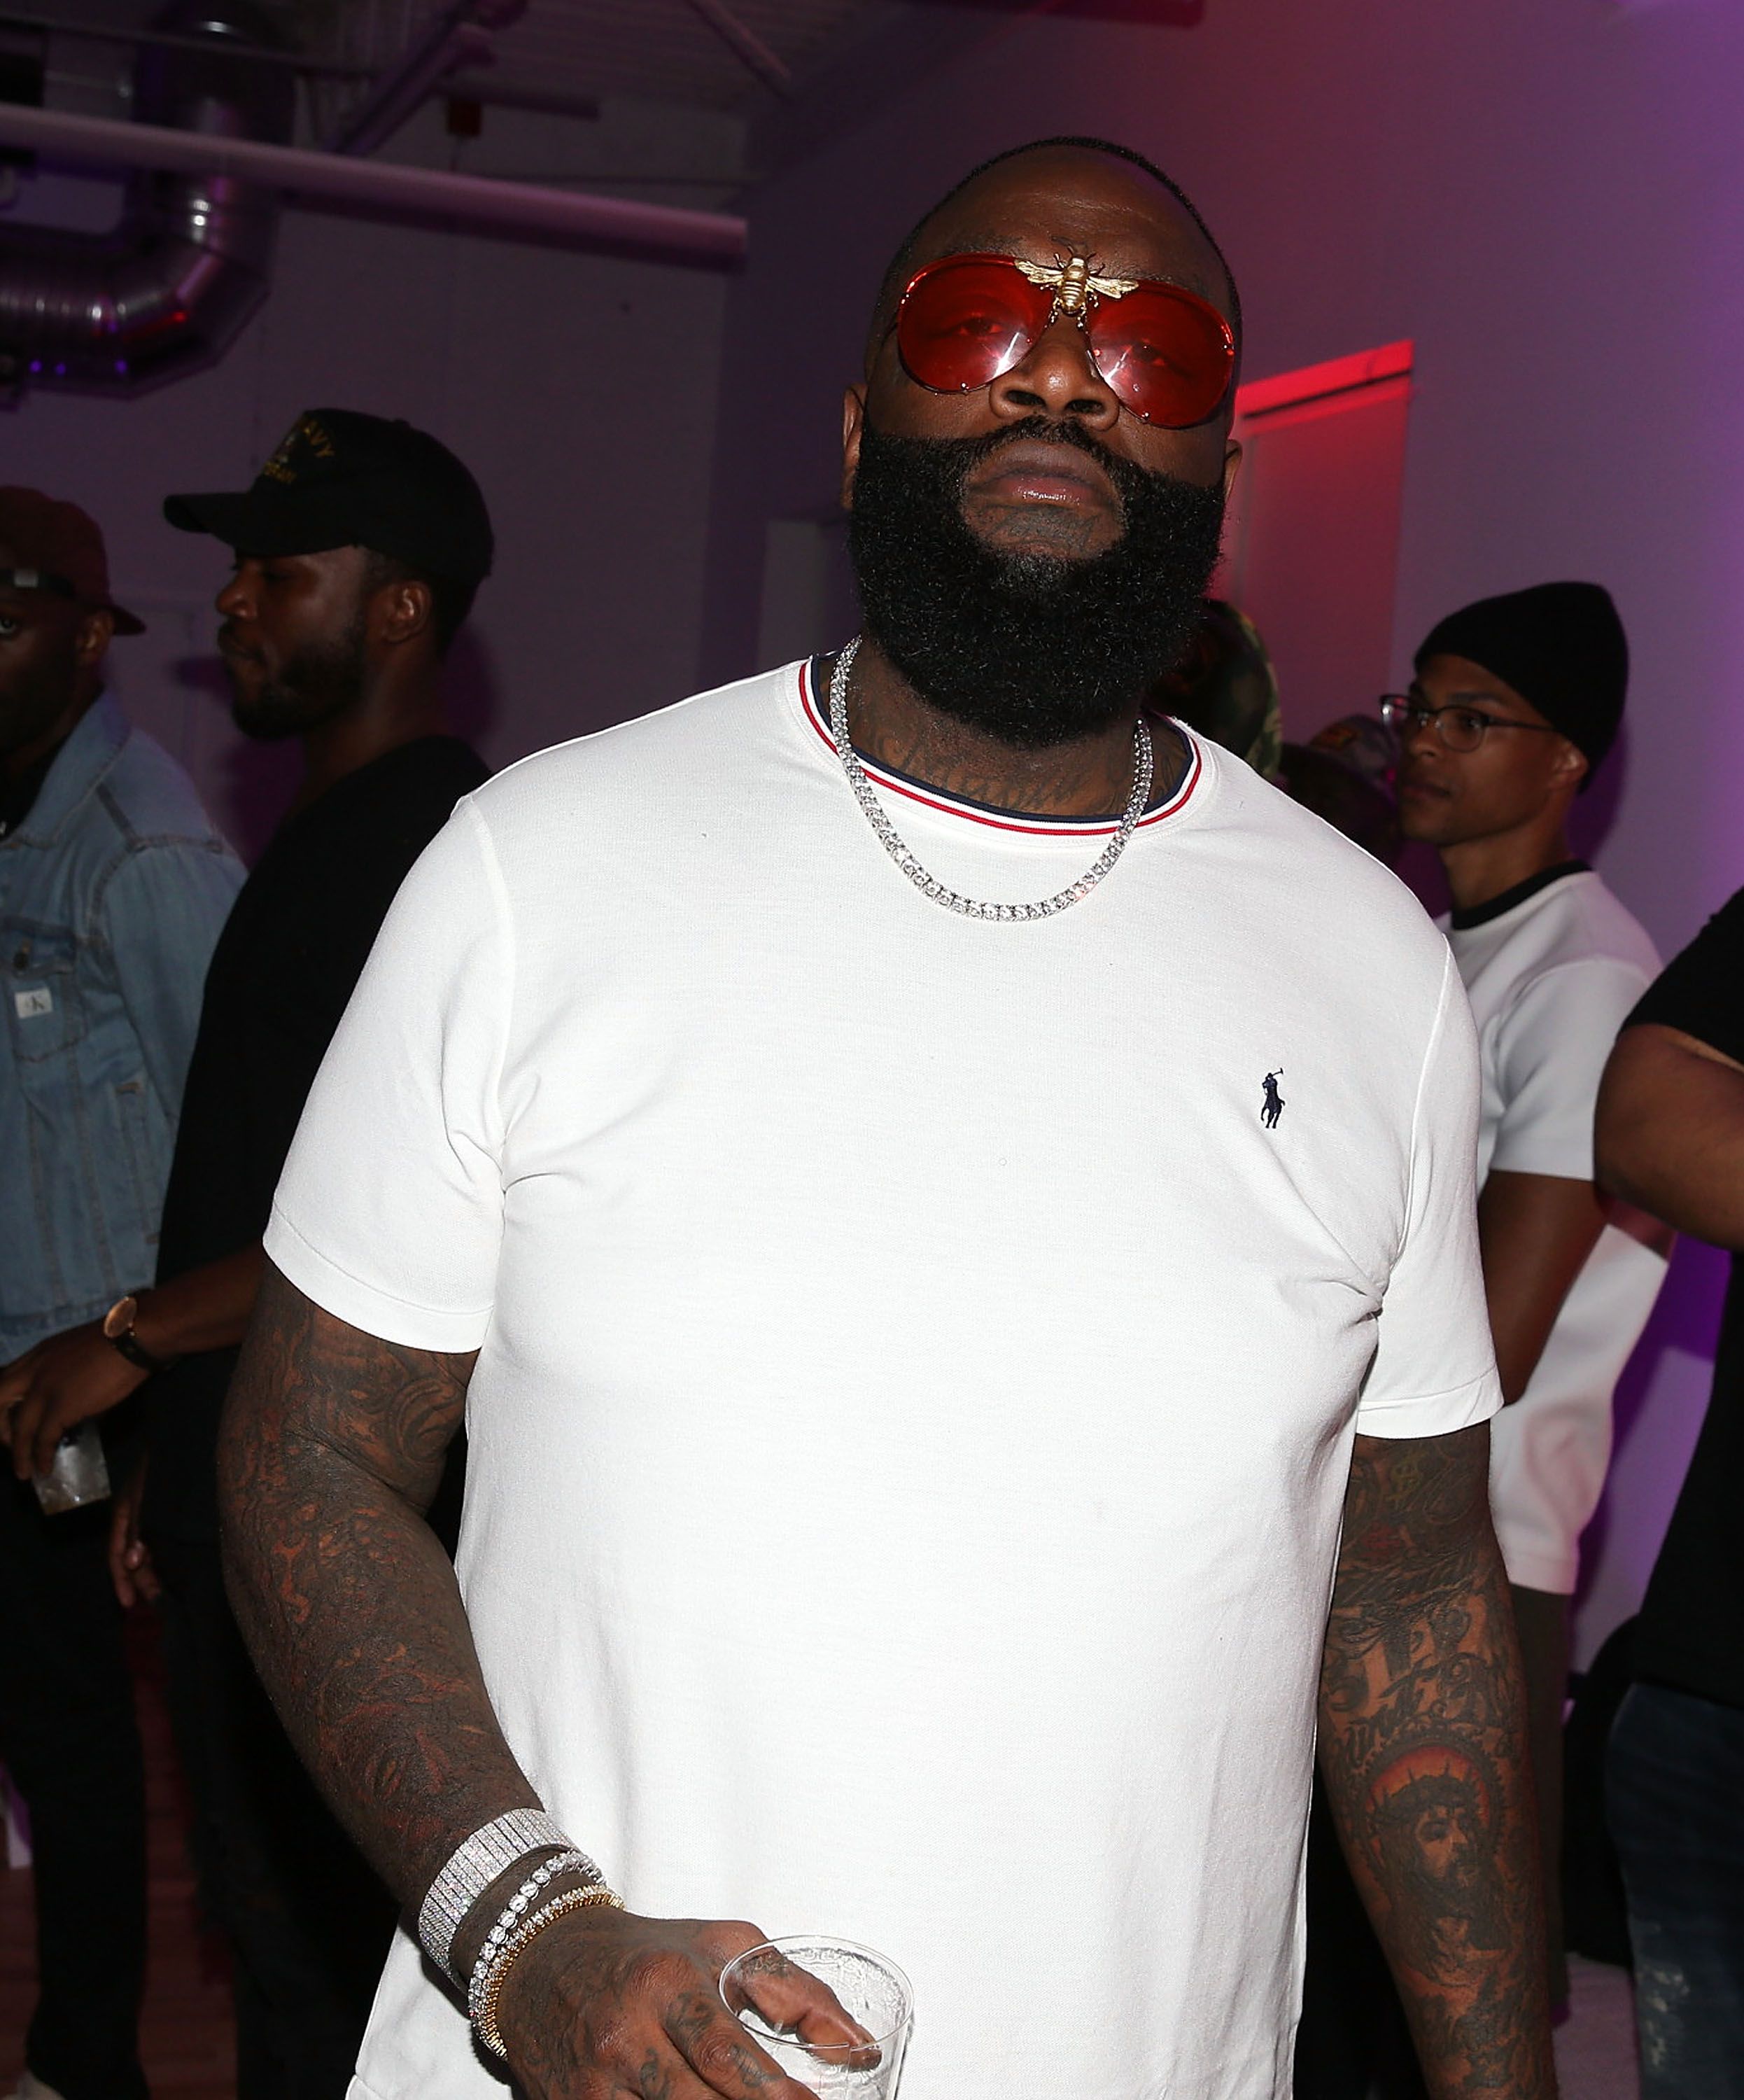 Rick Ross at Wale's "Shine" listening event at Genius Event Space on April 26, 2017 in New York City. | Source: Getty Images